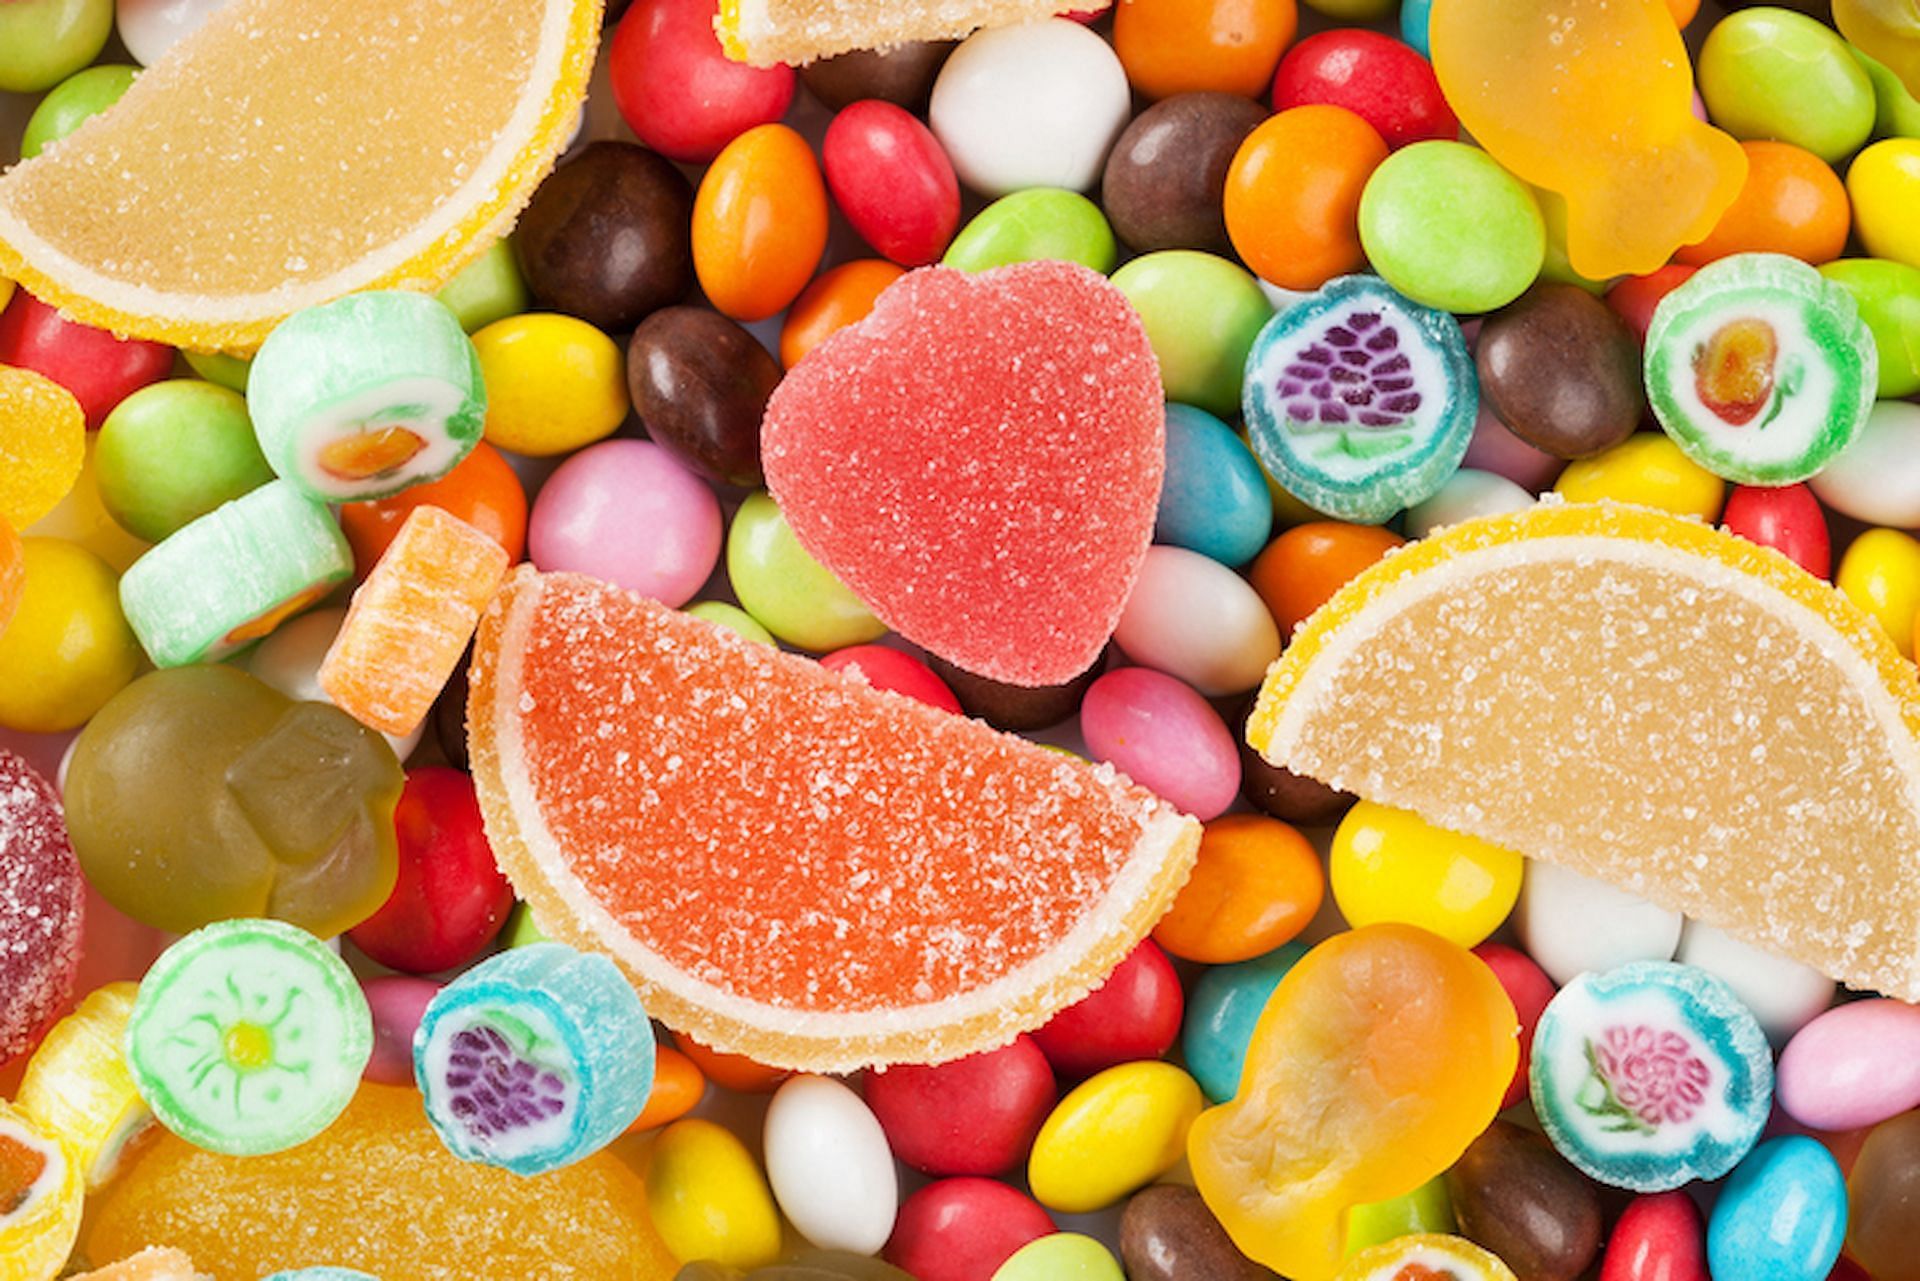 Overconsumption of sugary items can lead to obesity (Image via iStock)